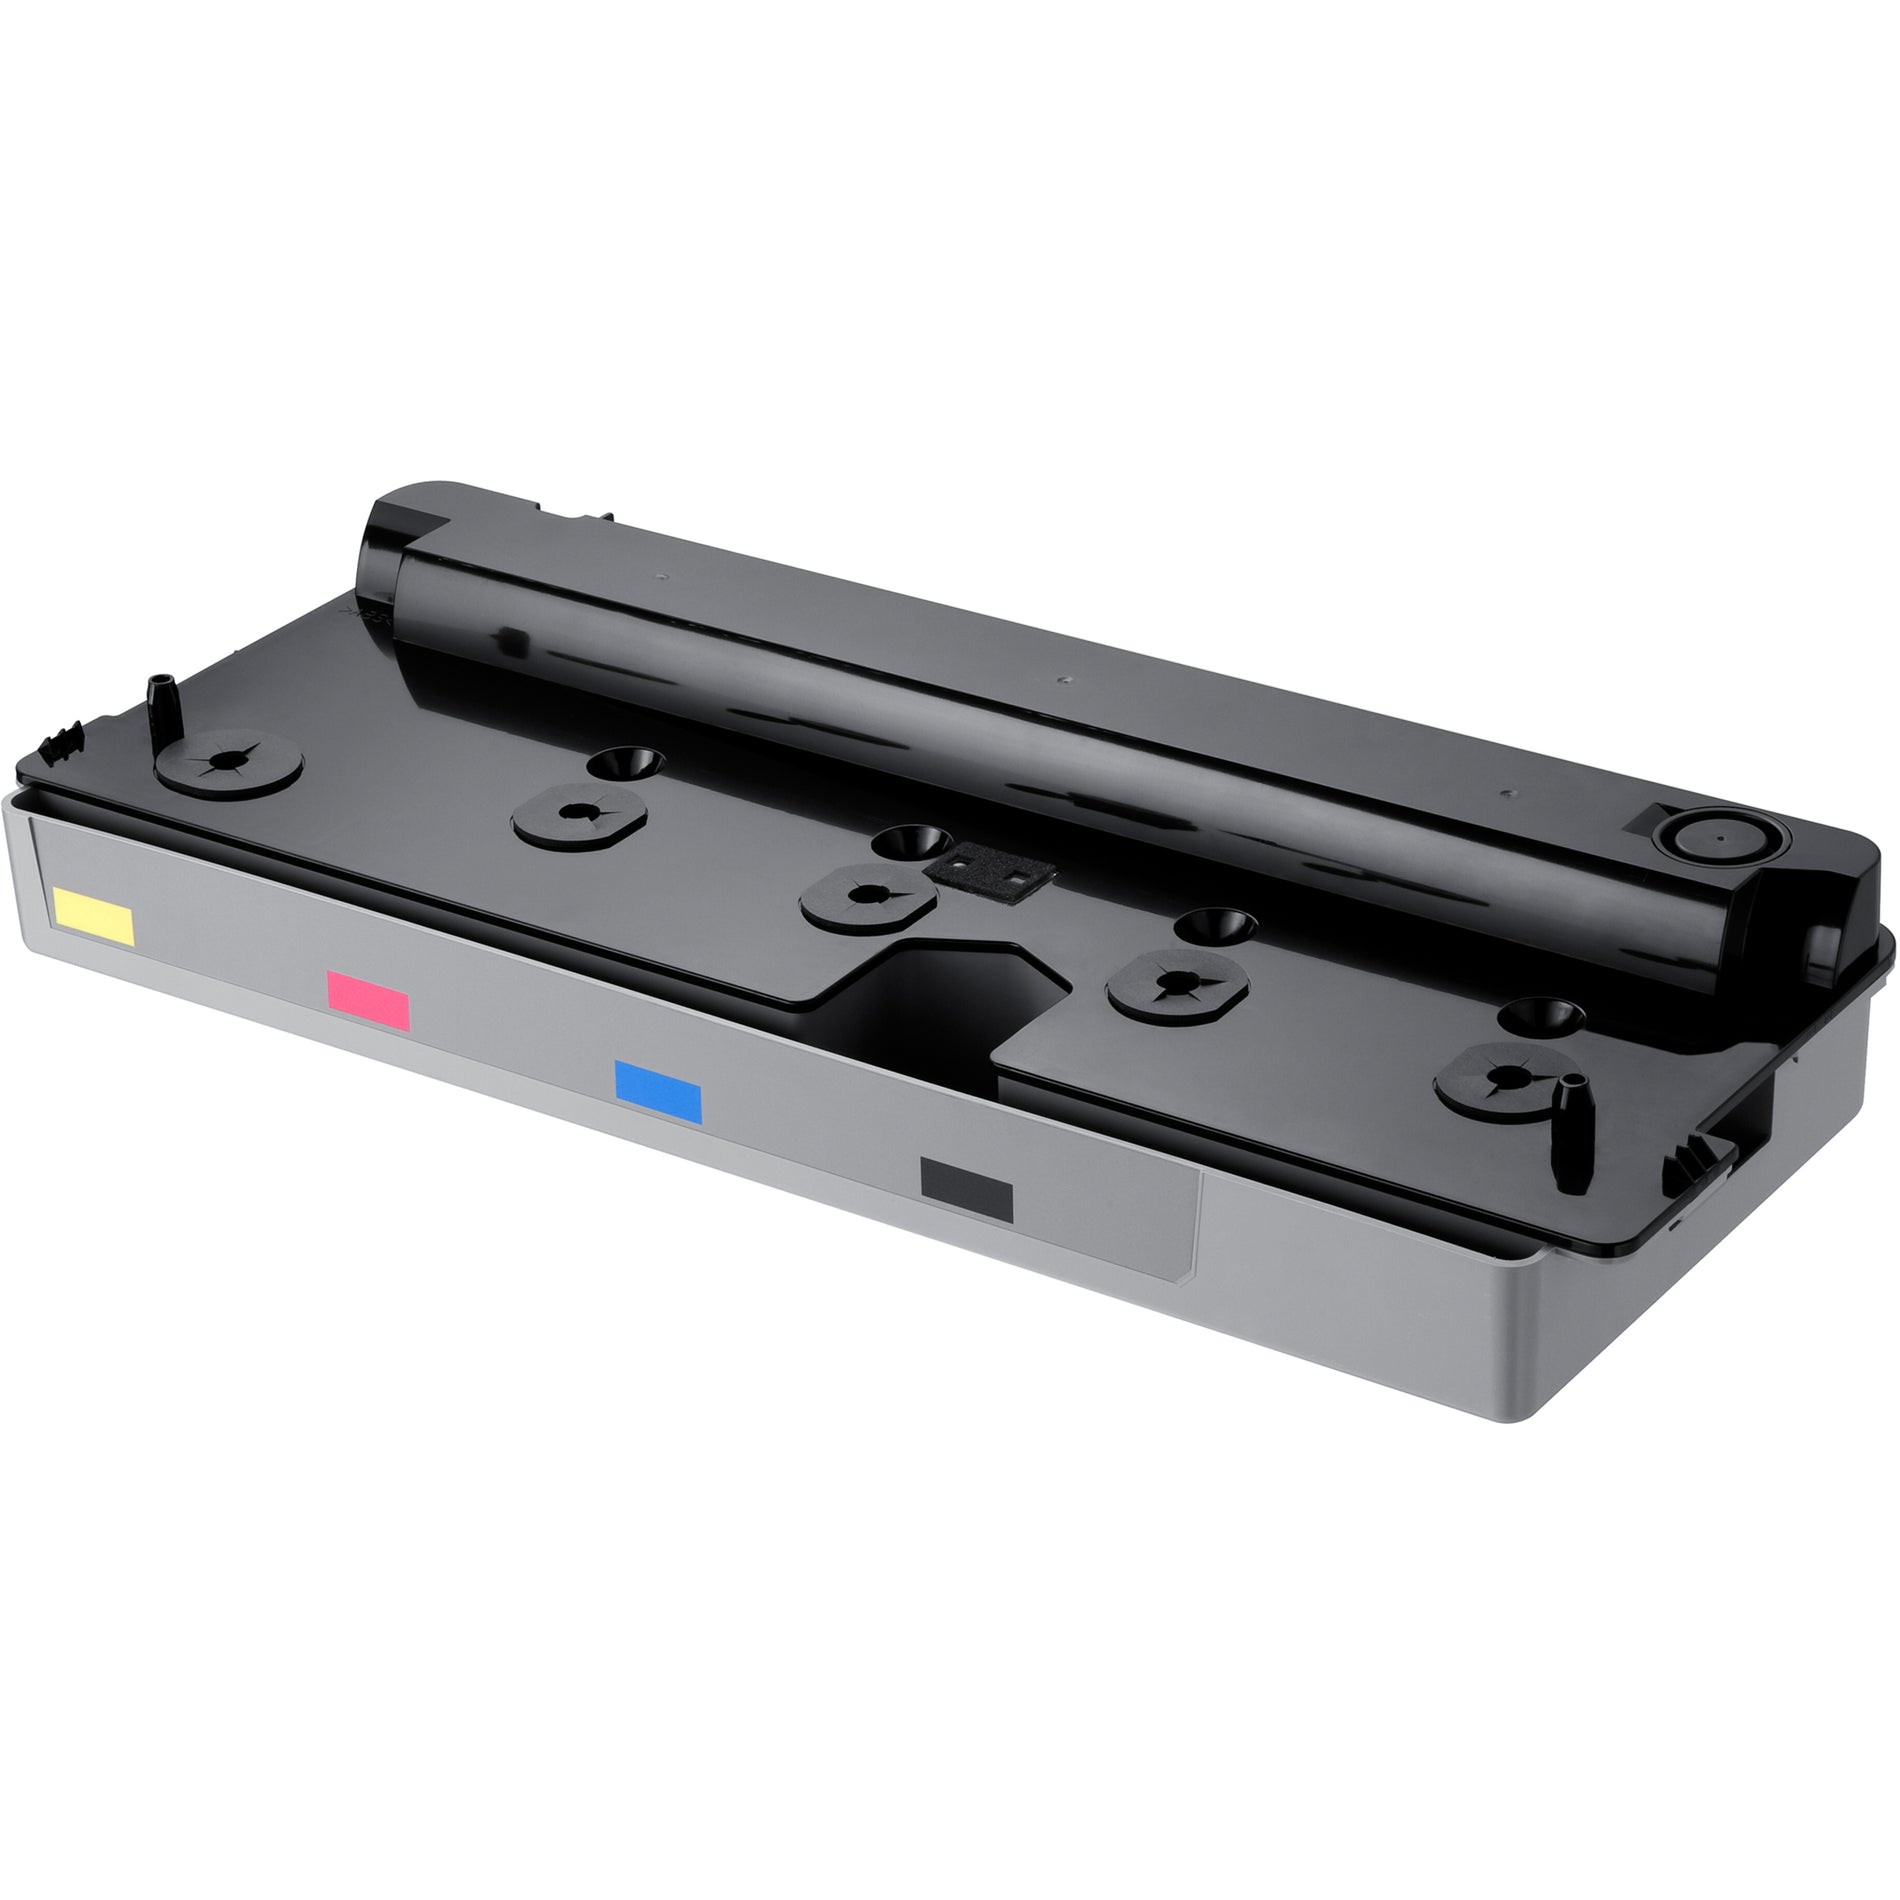 Samsung CLT-W606 Waste Toner Container - Laser - 75000 Pages, High-Quality Toner Disposal Solution